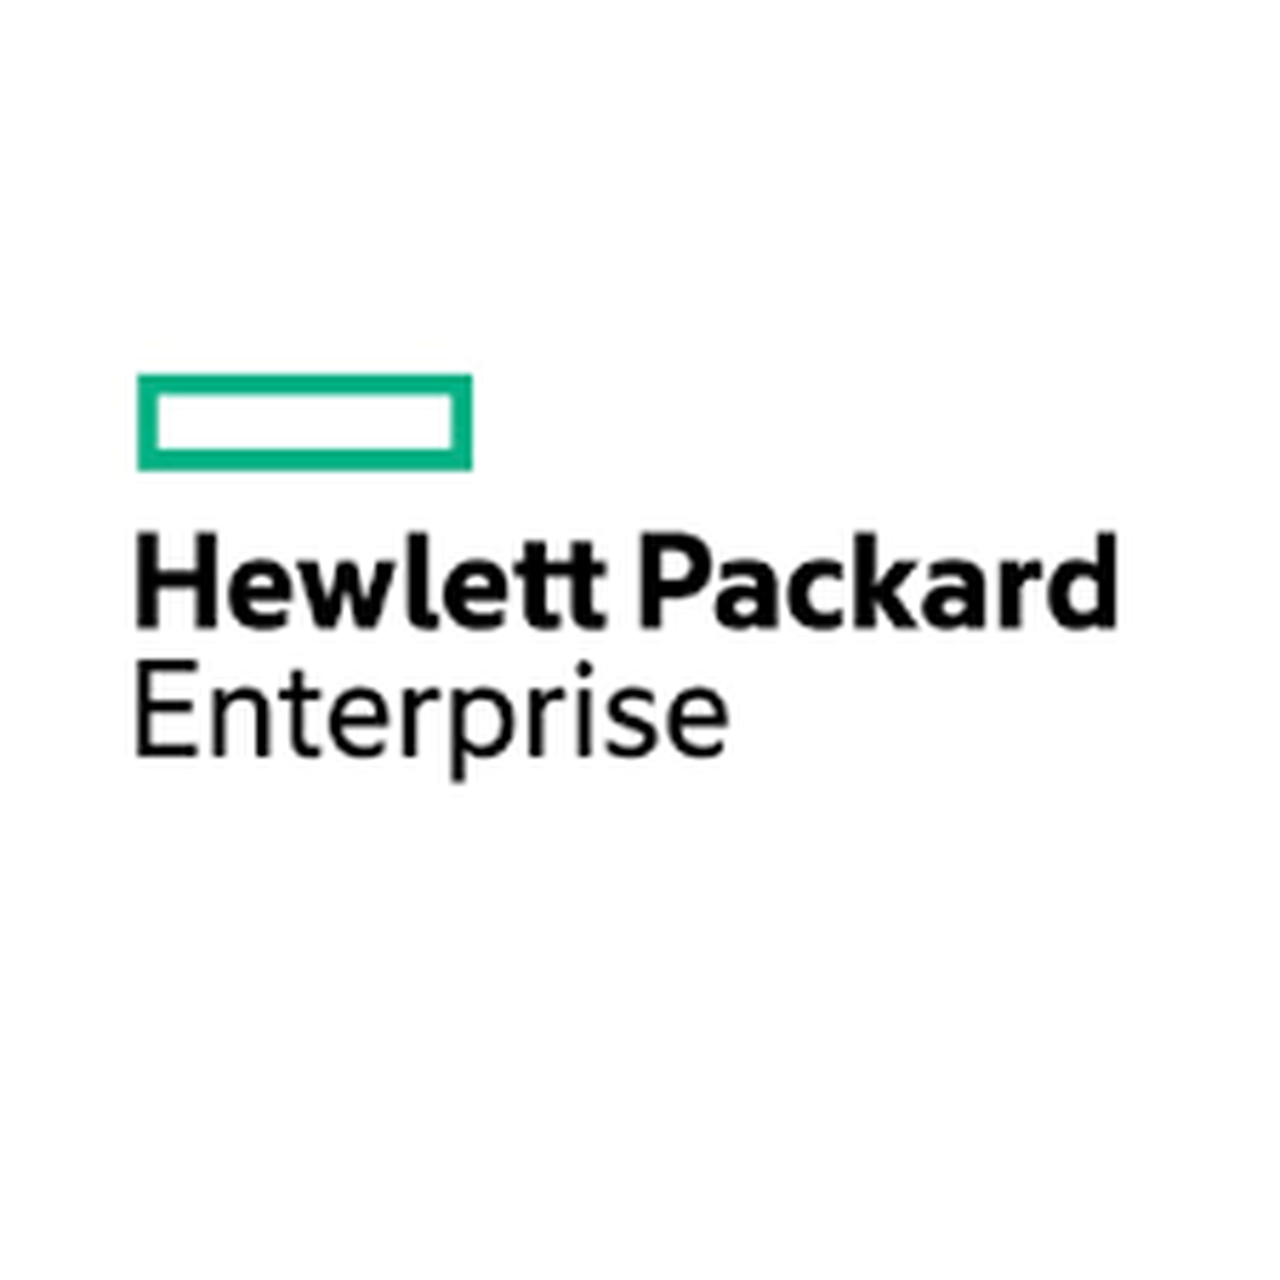 HPE 5940 48p 10GBT/6p 100G 2 F PS Argentina - English localization